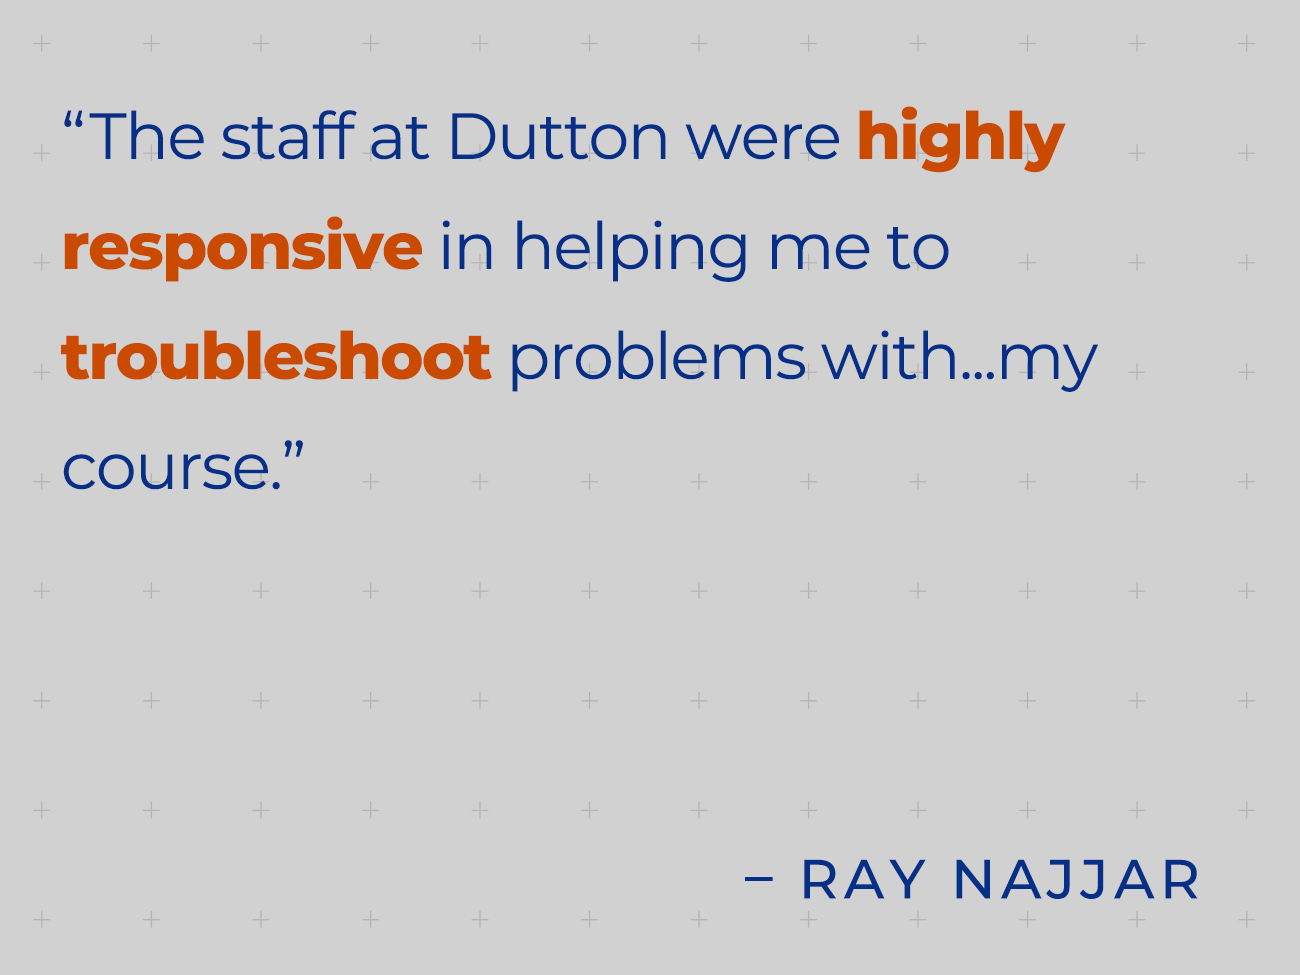 The staff at Dutton were highly responsive in helping me to troubleshoot problems with... my course. - Dr. Ray Najjar